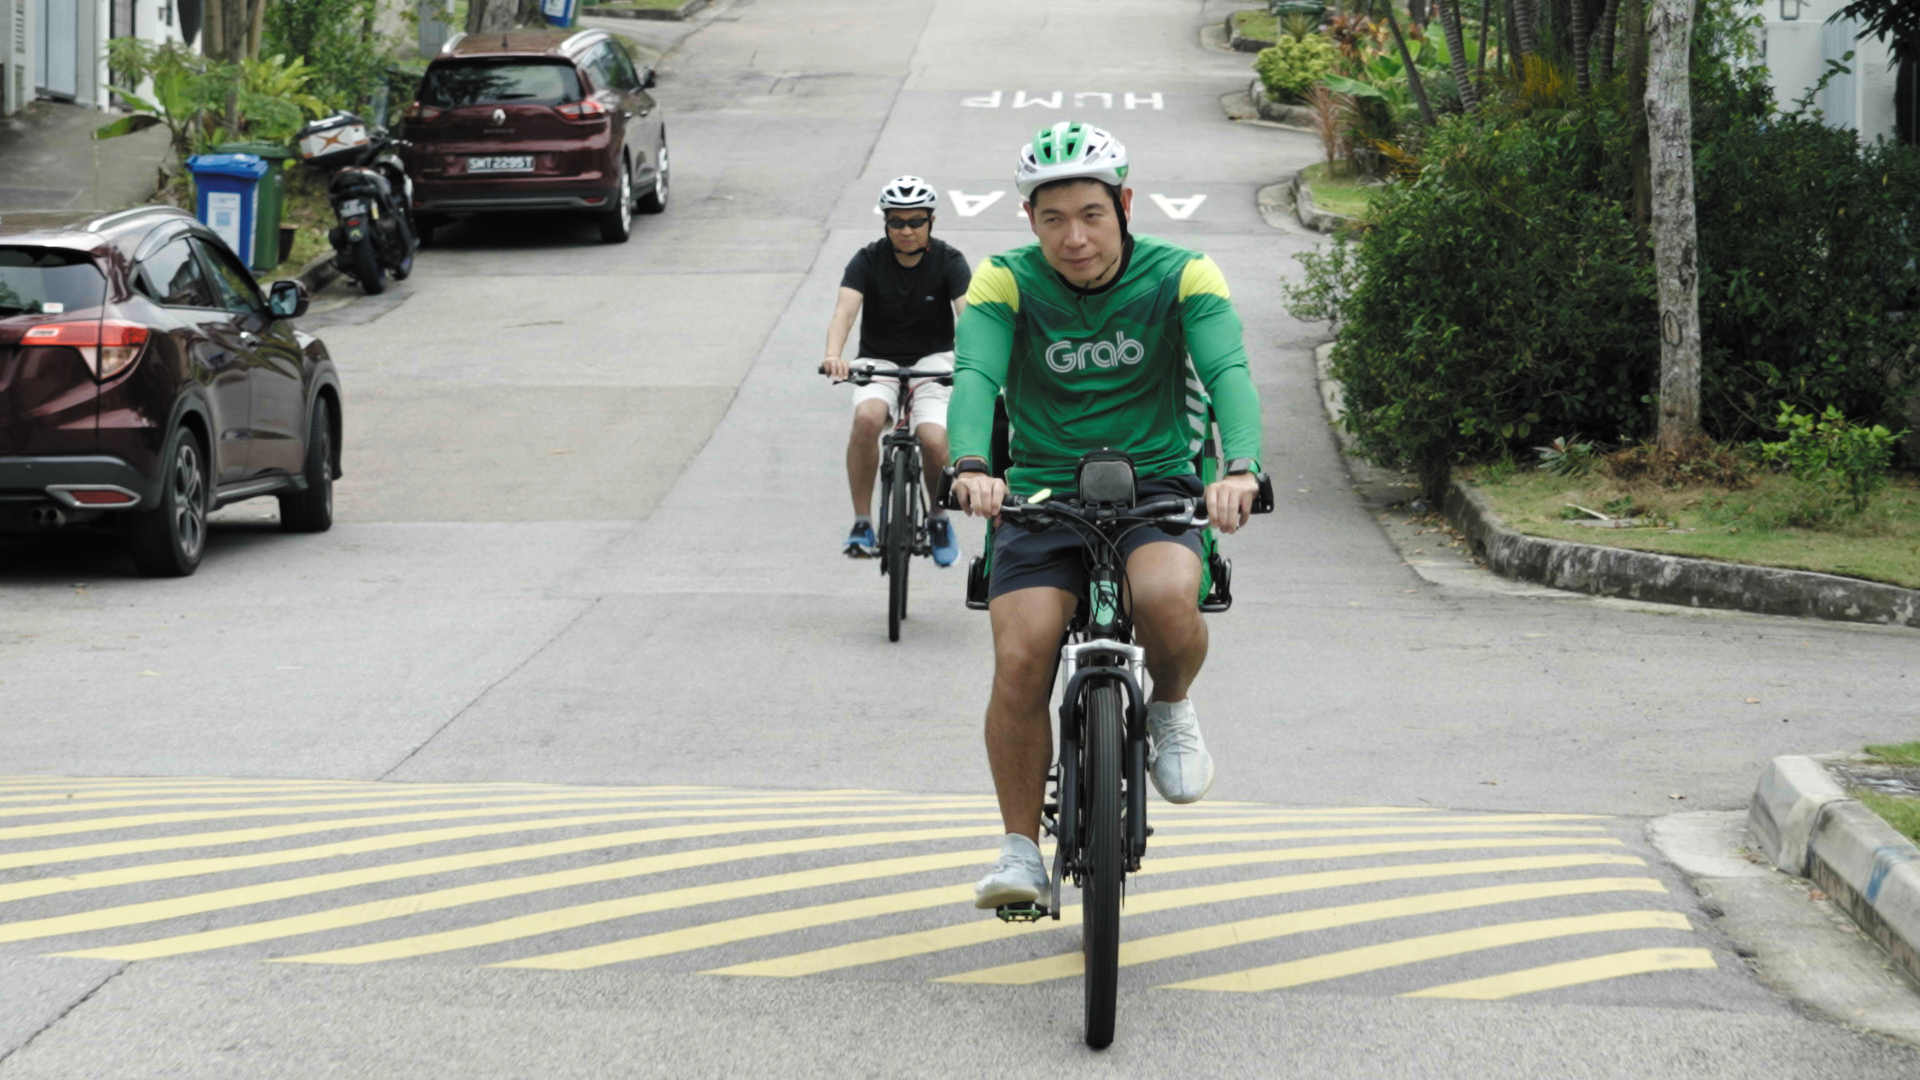 Longtime friends Anthony Tan (front) and Jixun Food (back) out on a GrabFood delivery run.